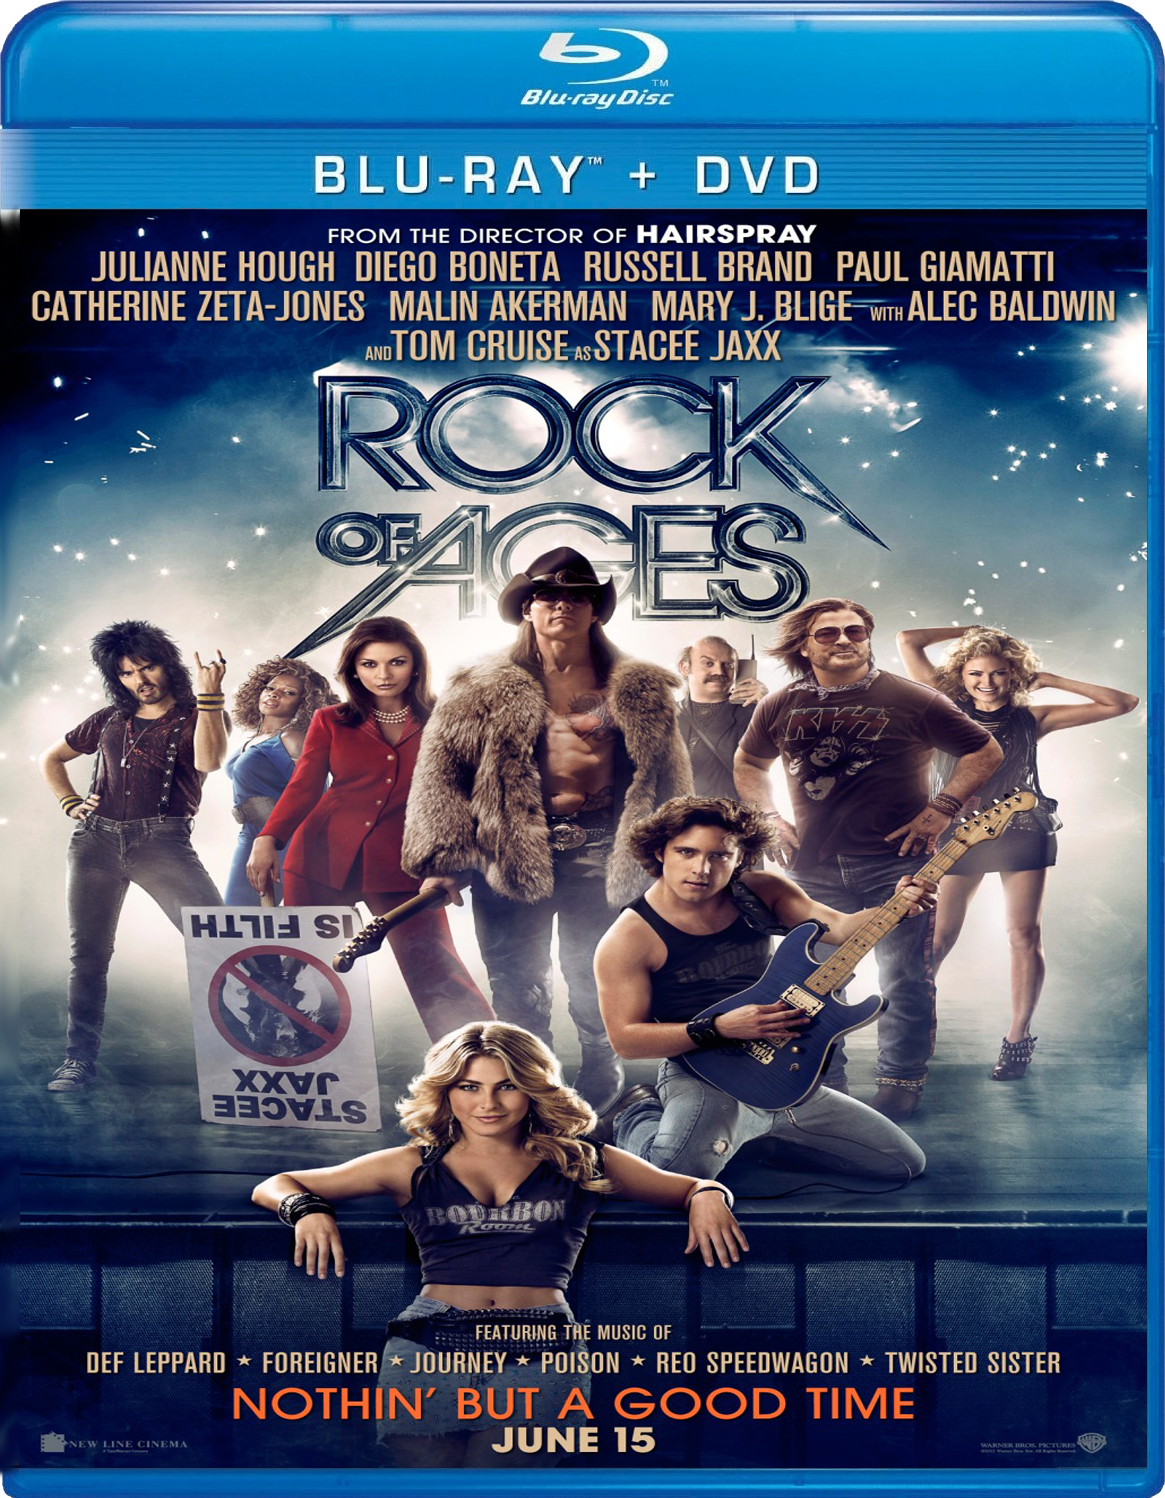 Blu ray кинотеатры. Rock of ages 2012 poster. Rock of ages 2012 IMDB posters.